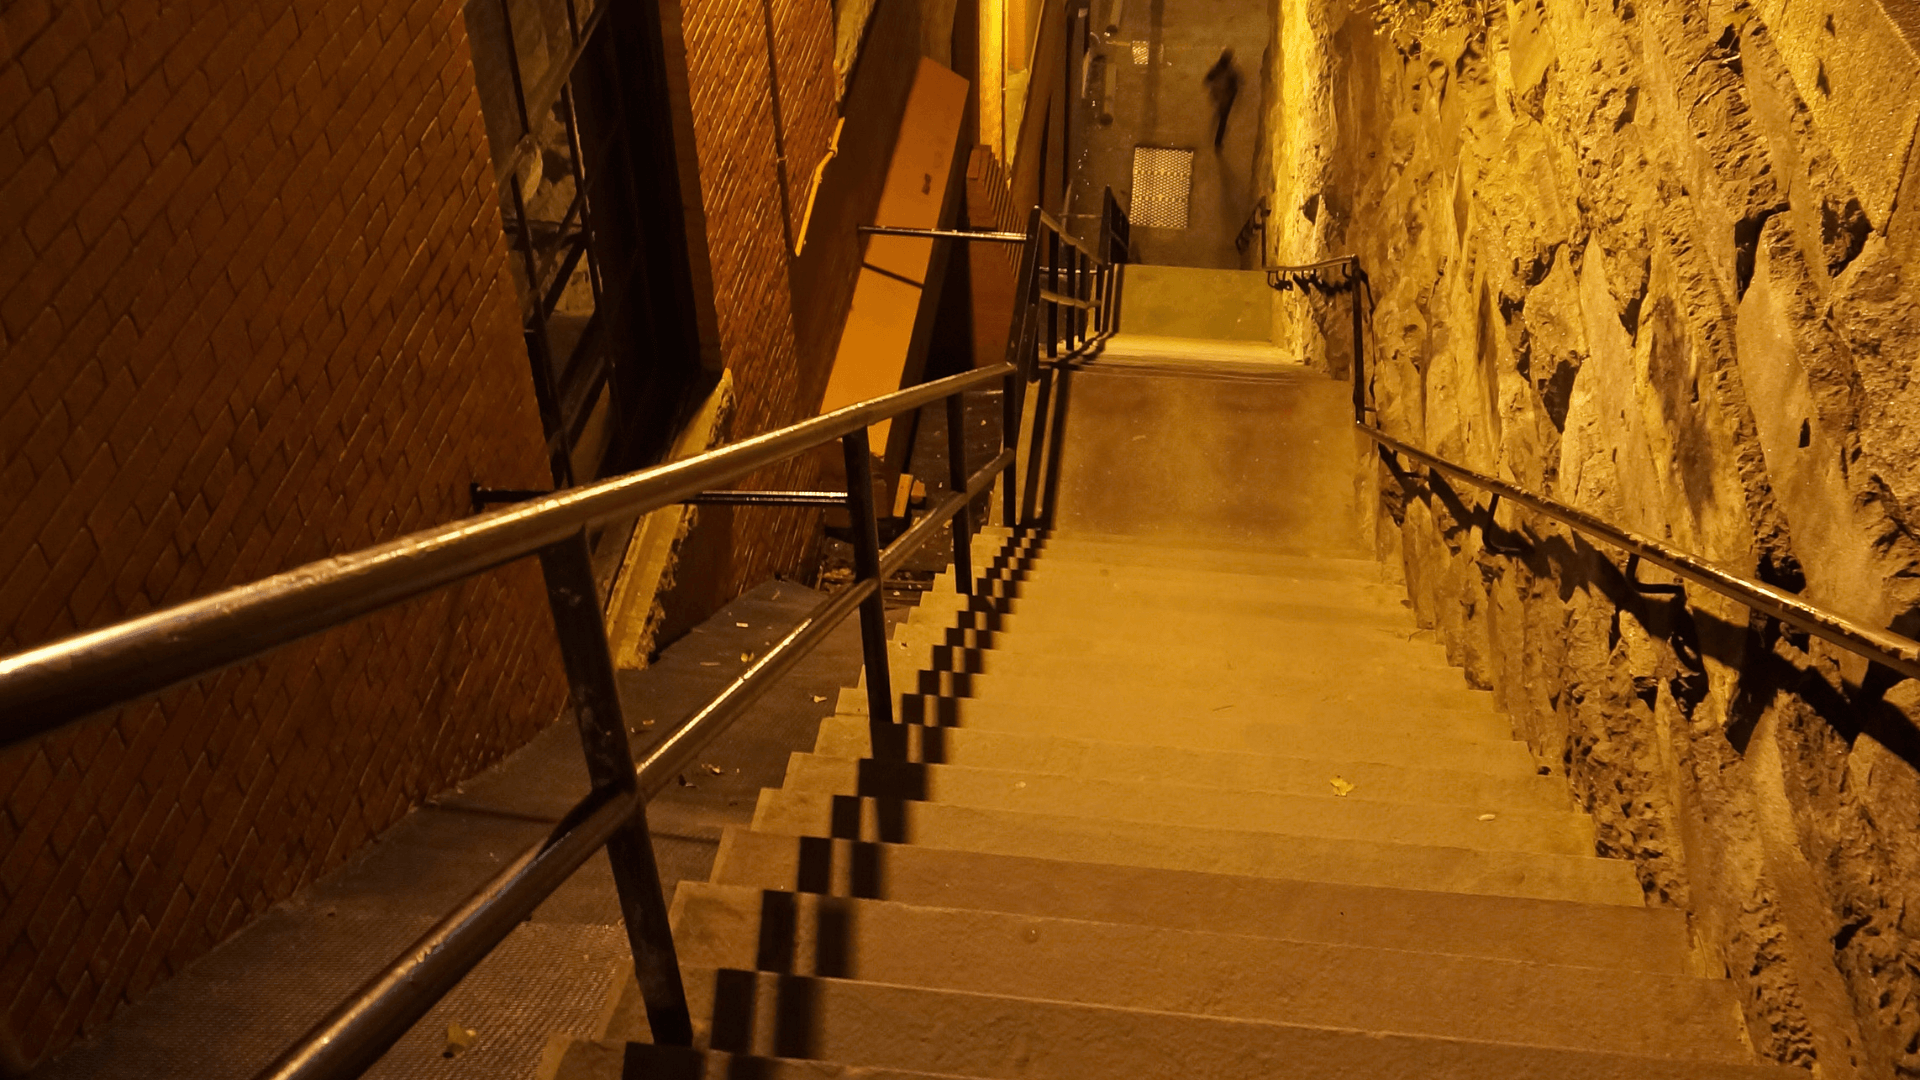 A view down the Exorcist steps in Washington, D.C.'s Georgetown neighborhood